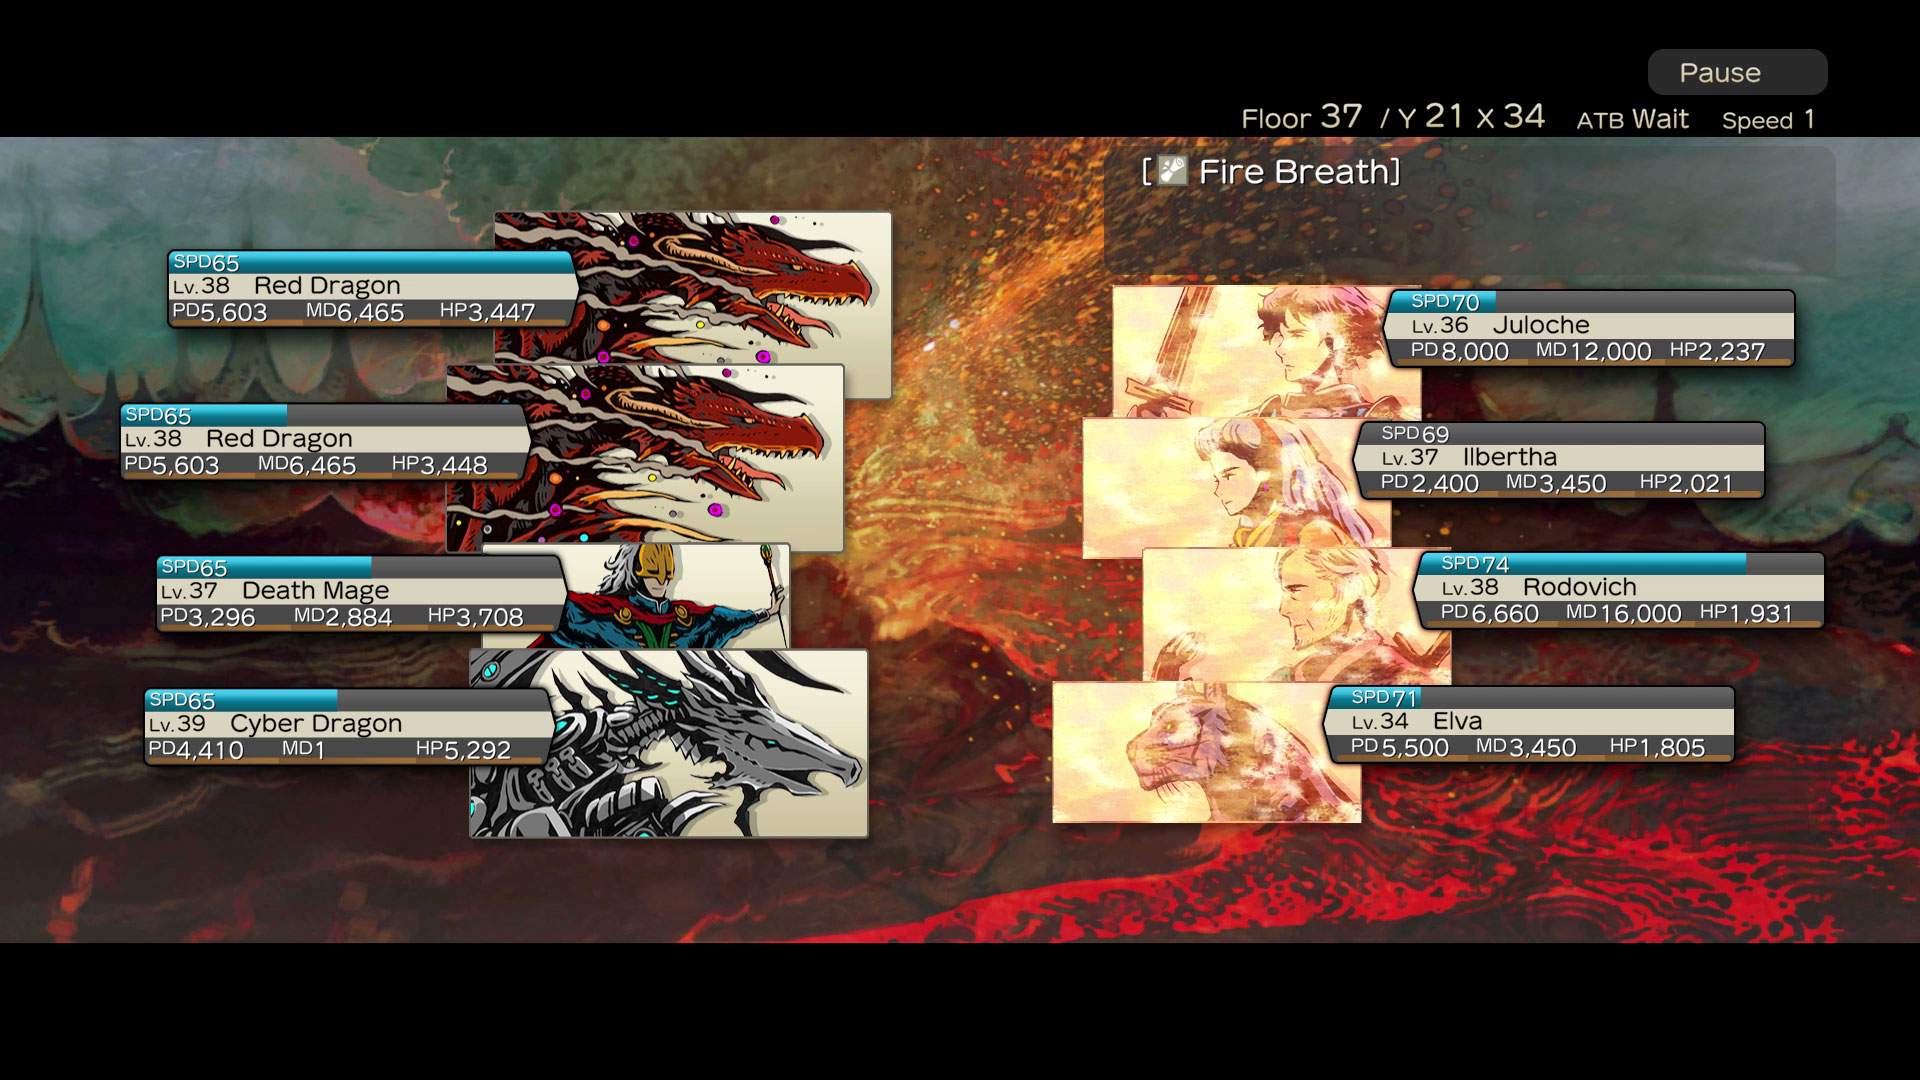 Gameplay screenshot of a turn based battle, with 4 characters facing off against 4 enemies.